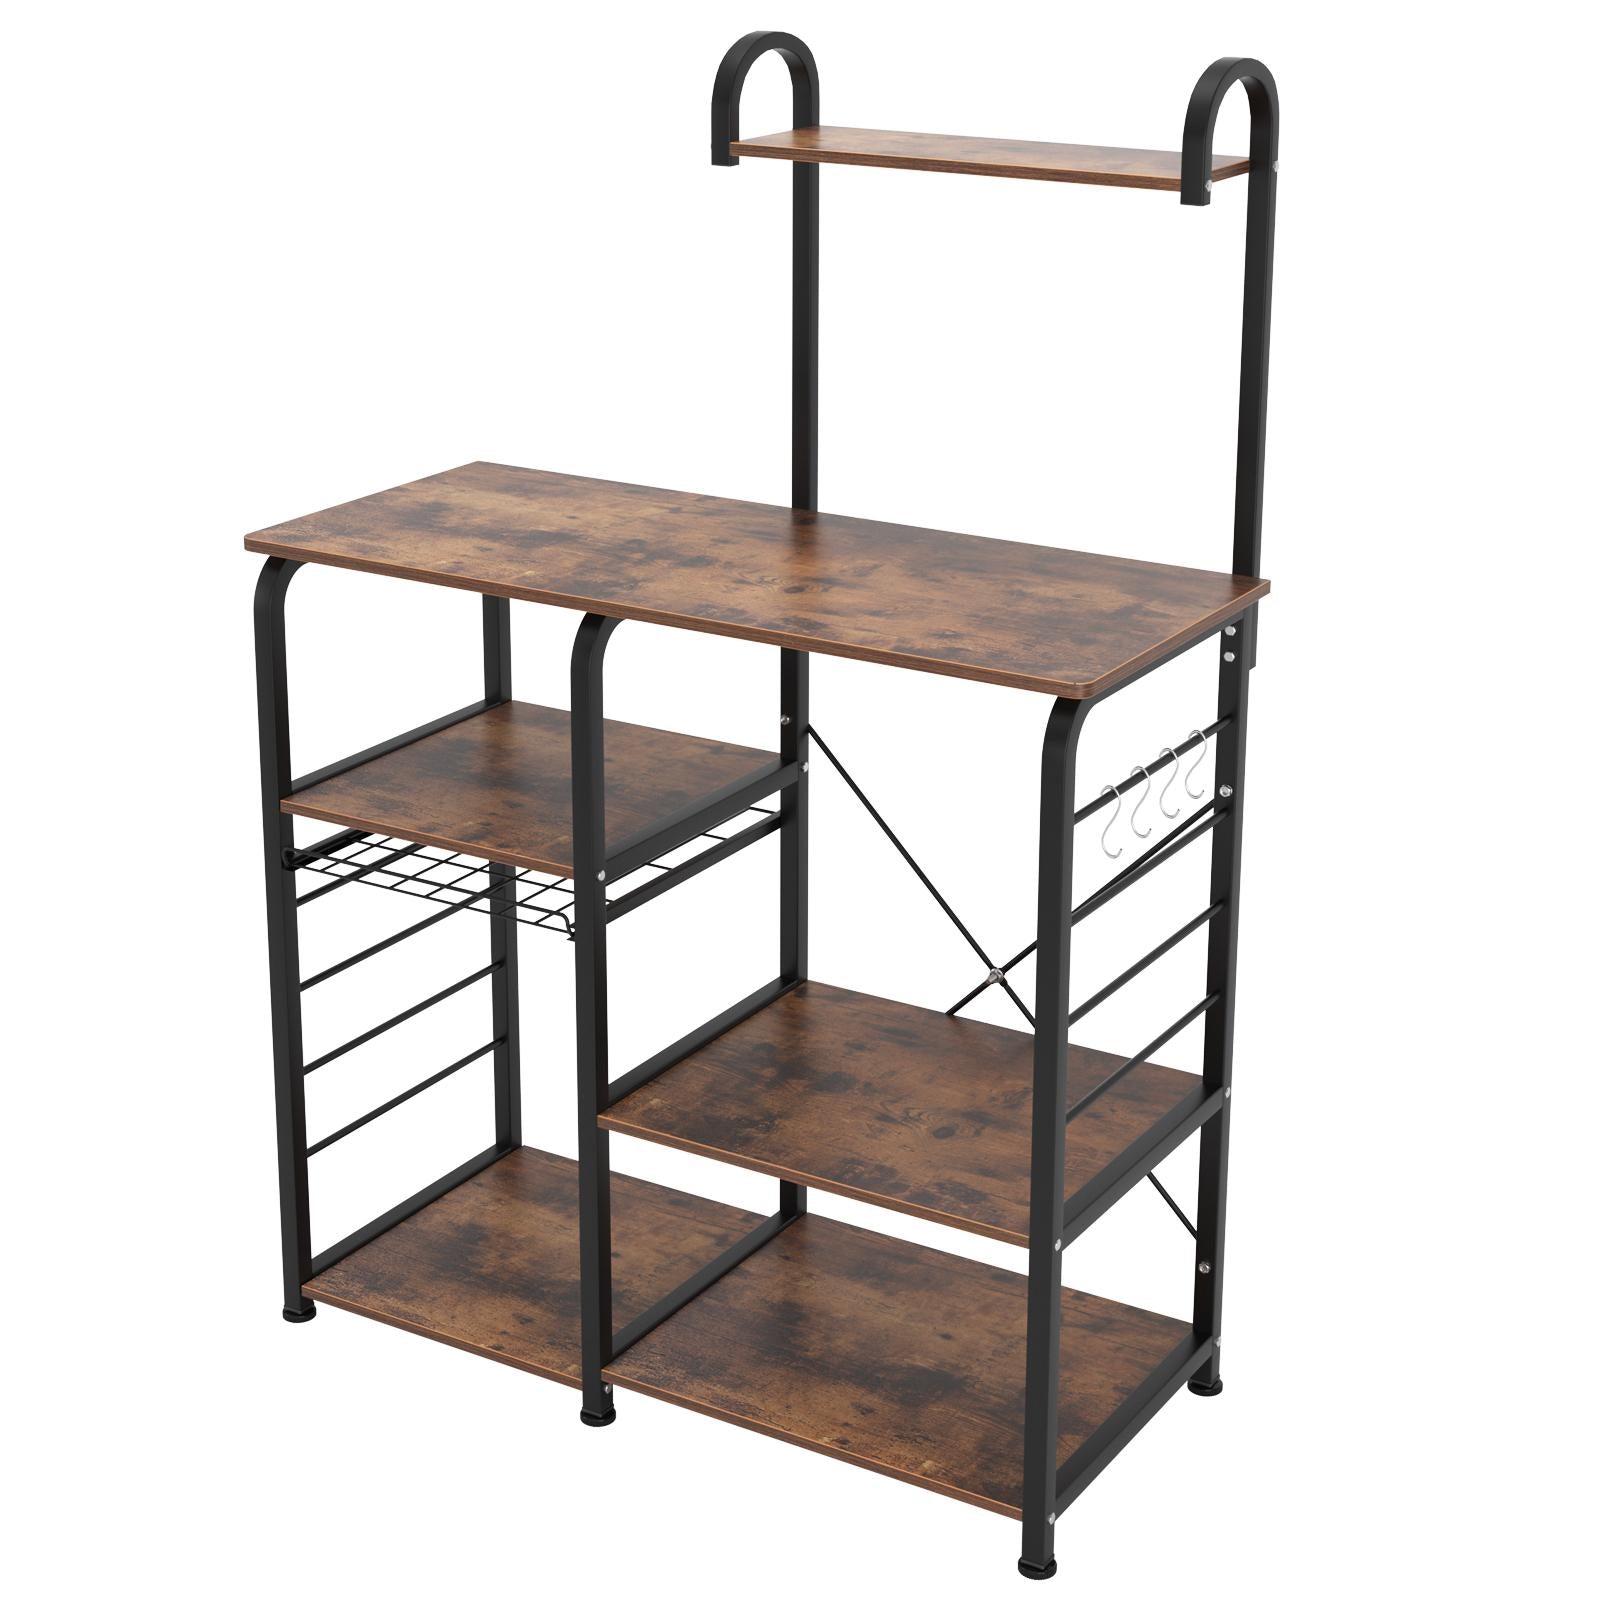 Kitchen Bakers Rack,Microwave Cart Coffee Station,  Utility Microwave Oven Stand Storage Cart, Workstation Shelf